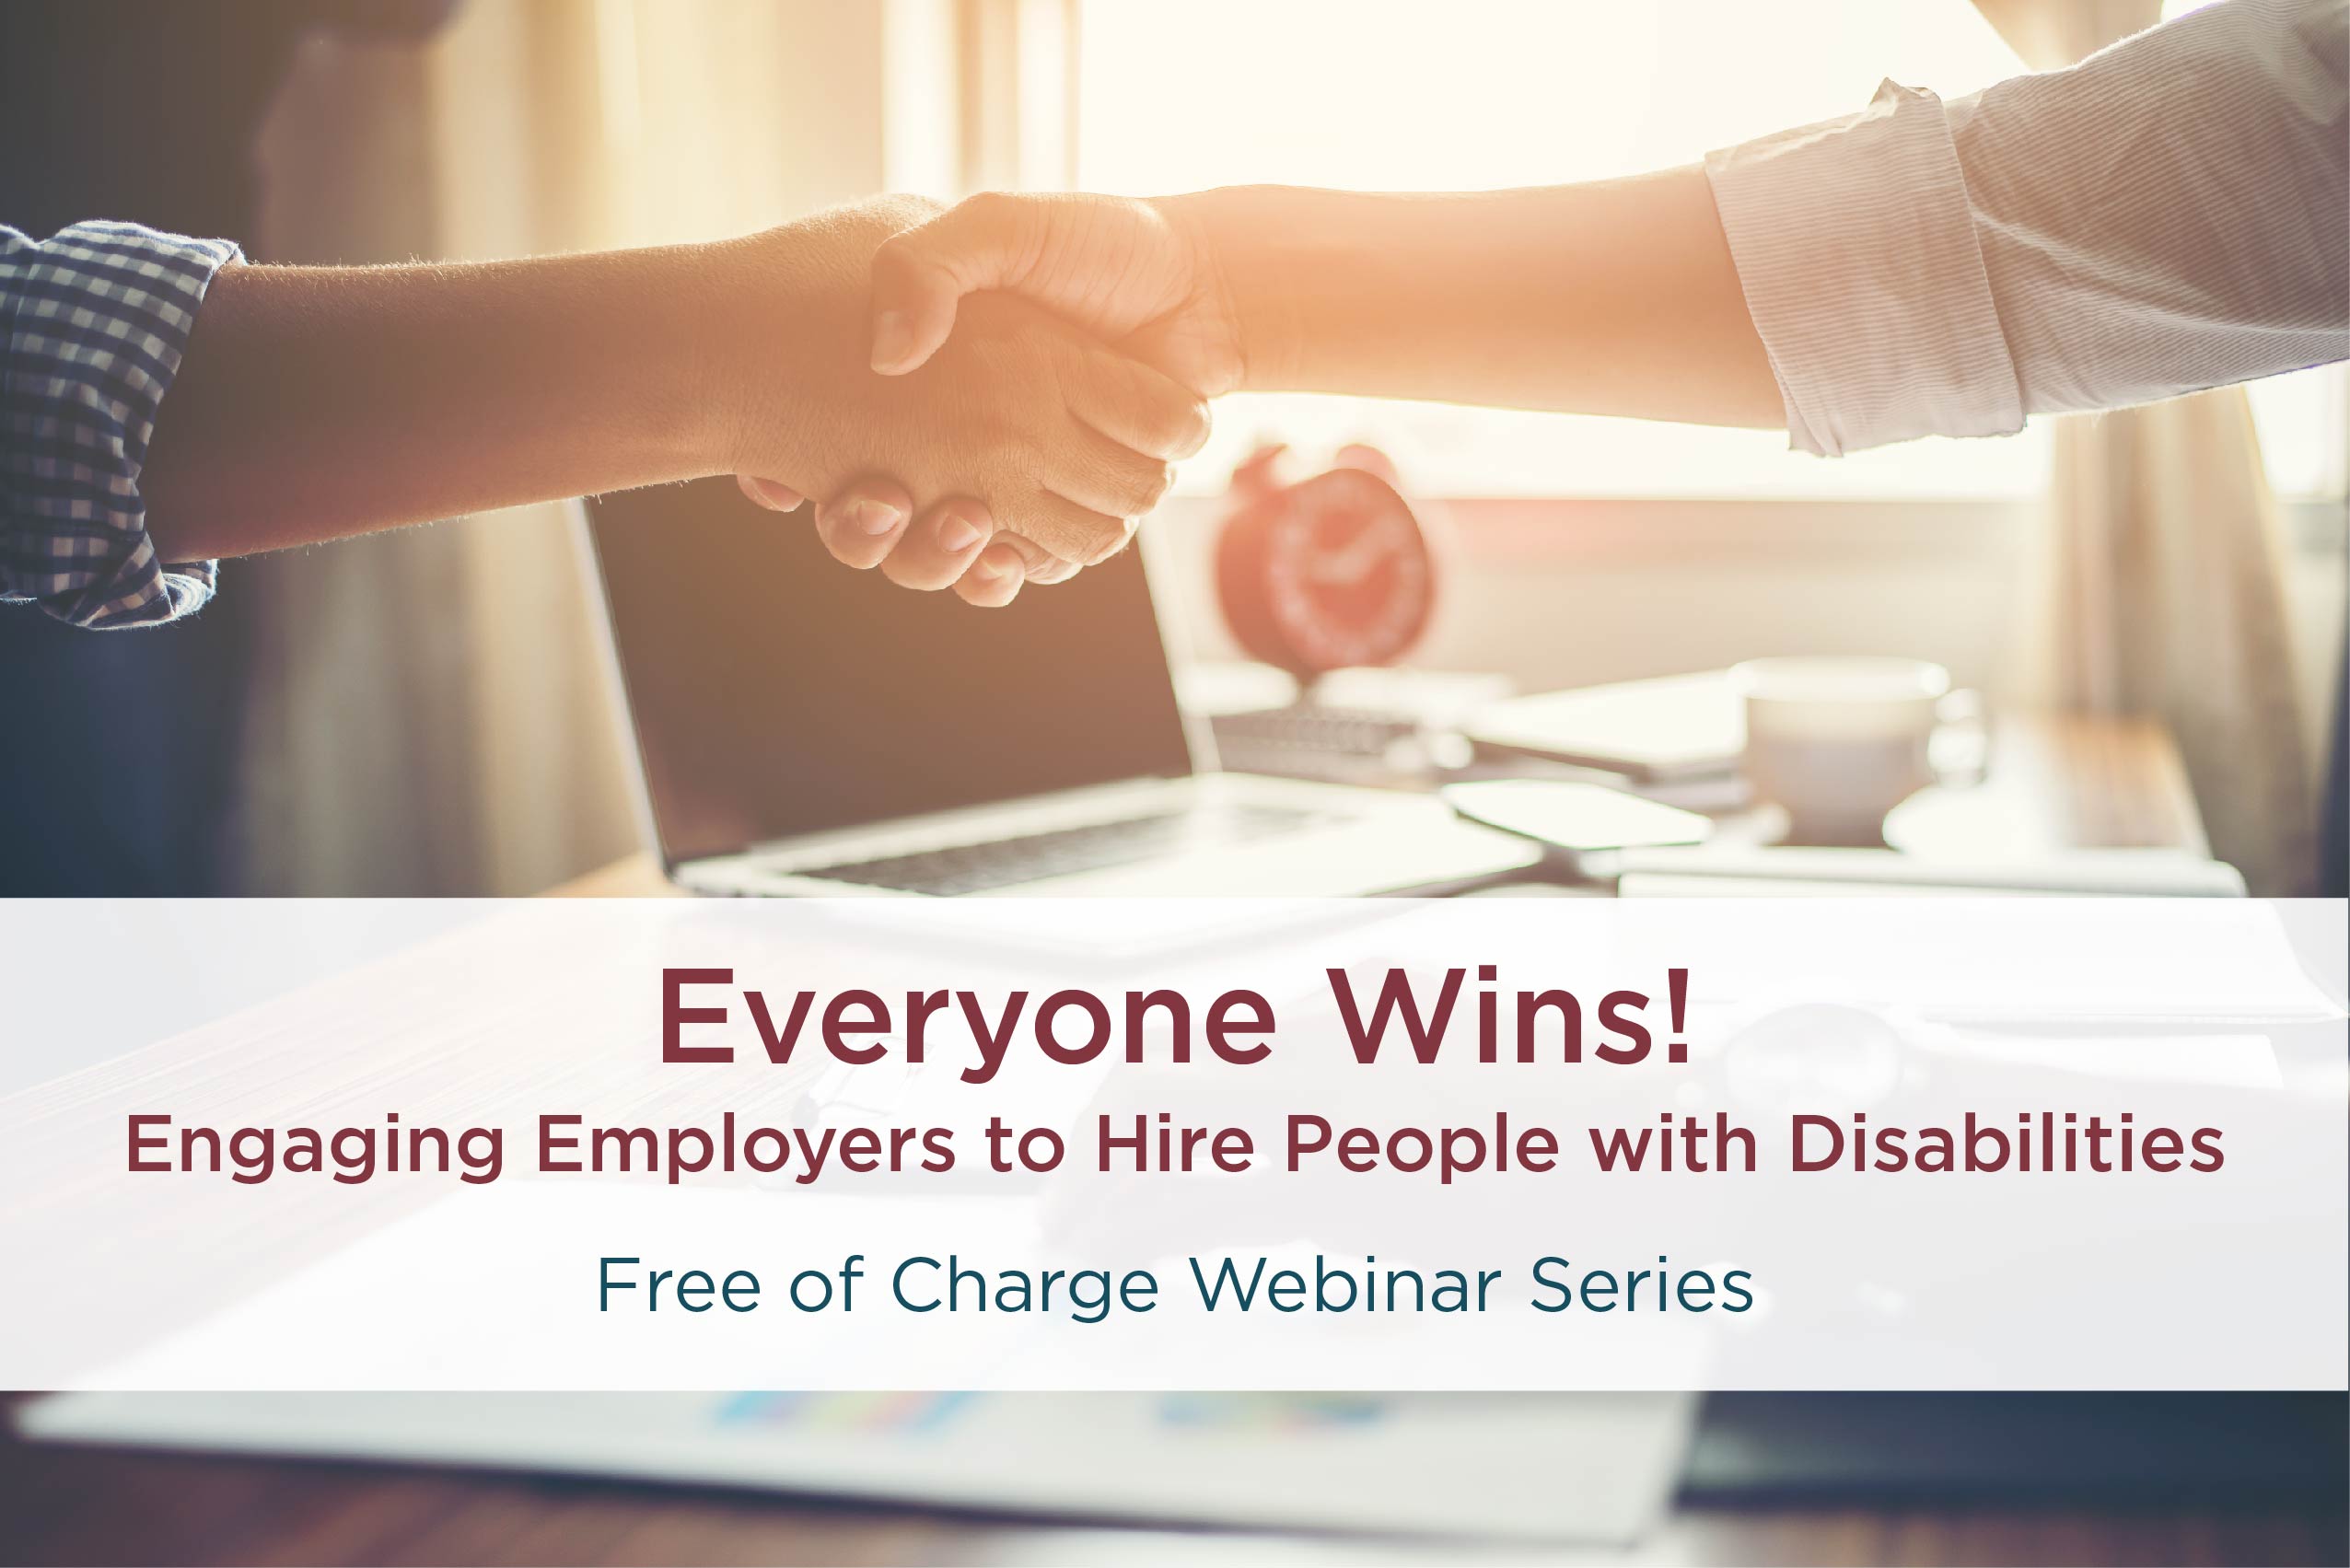 Everyone Wins! Engaging Employers to Hire People with Disabilities. Free of Charge Webinar Series